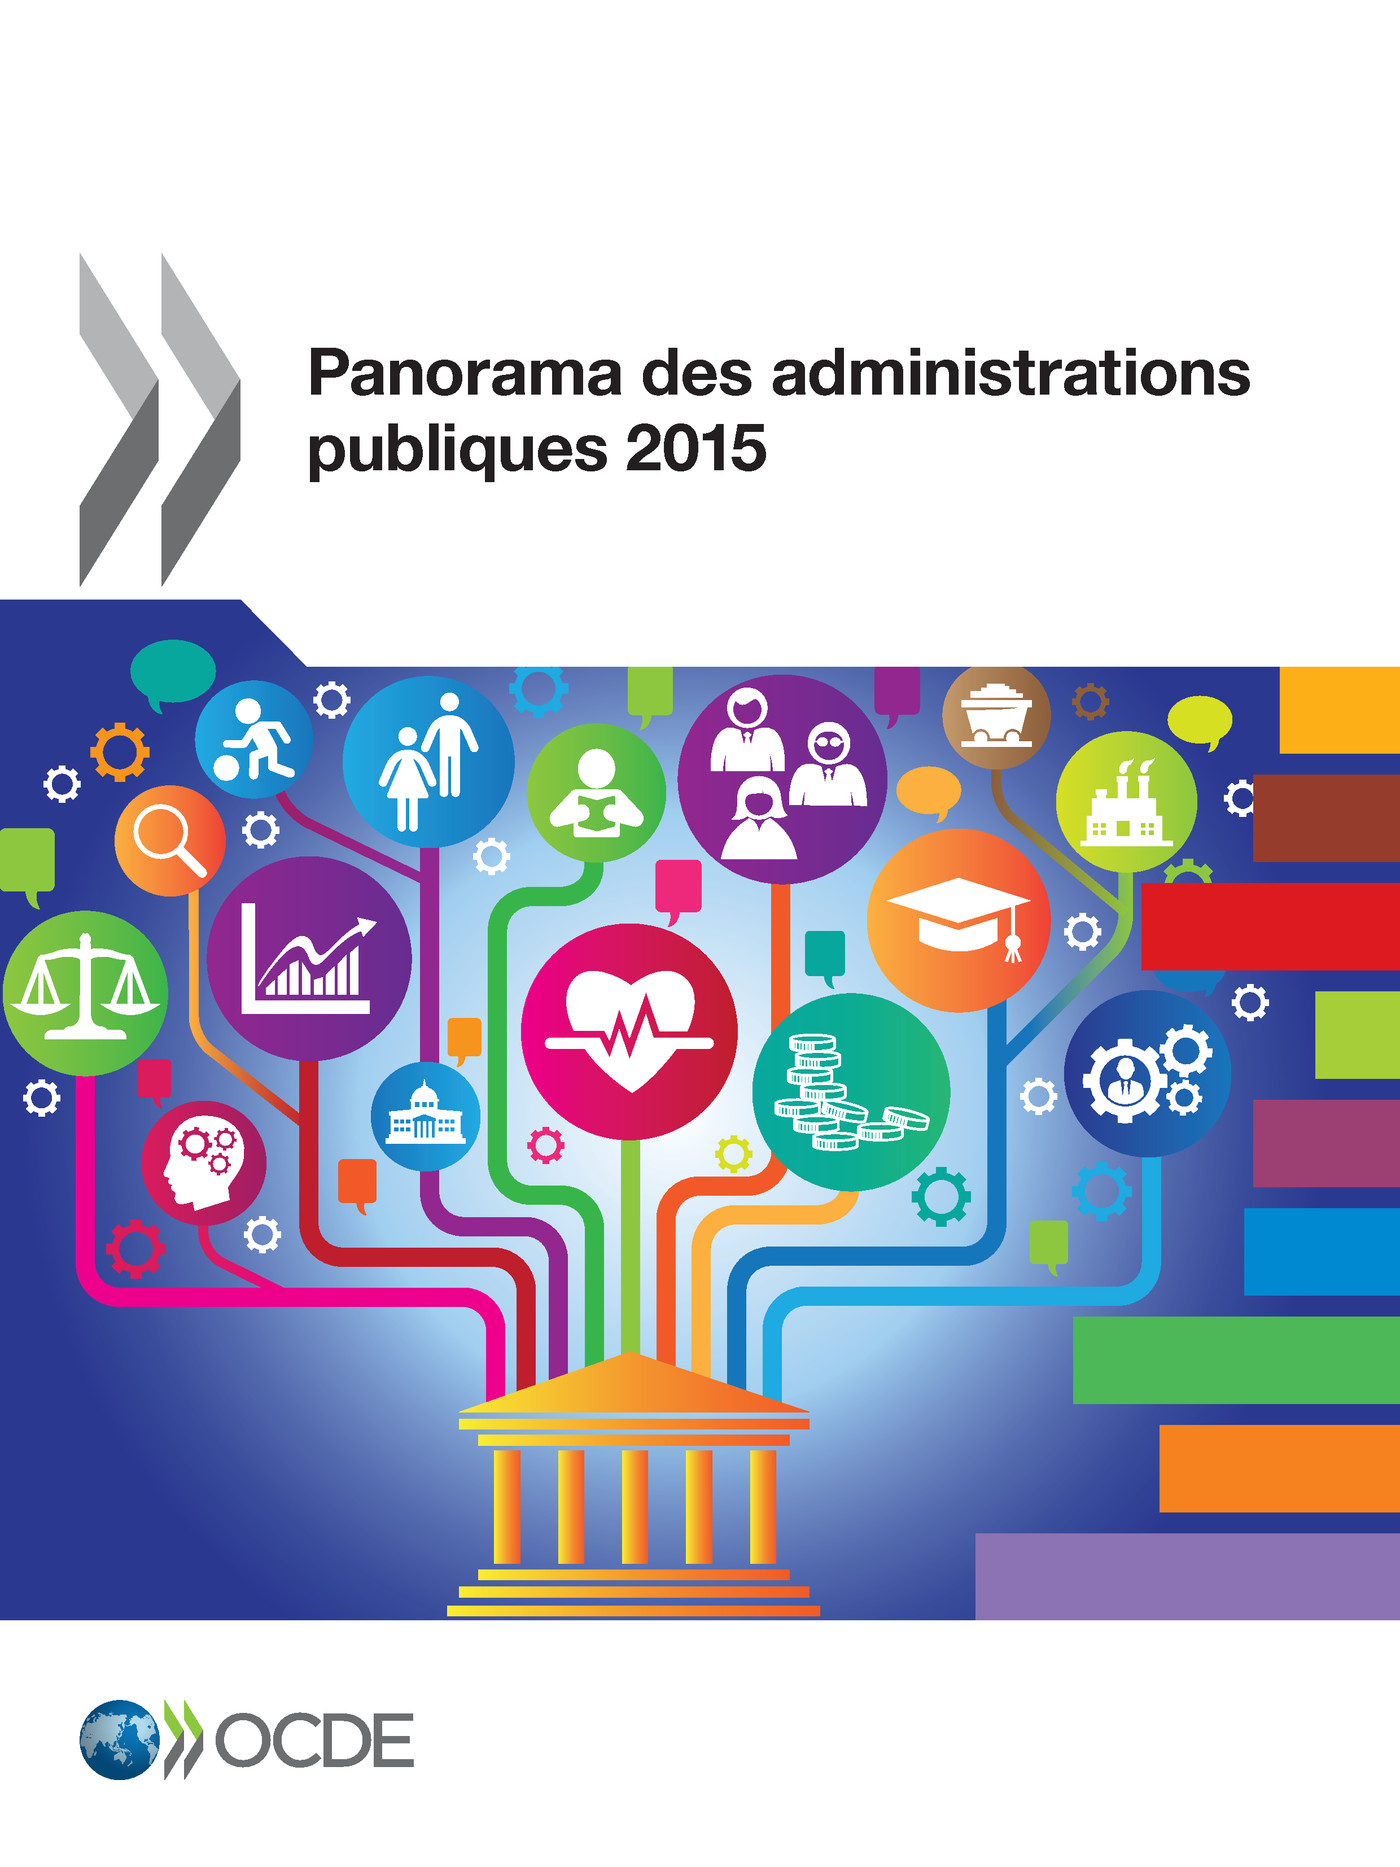 Panorama des administrations publiques 2015 -  Collectif - OCDE / OECD